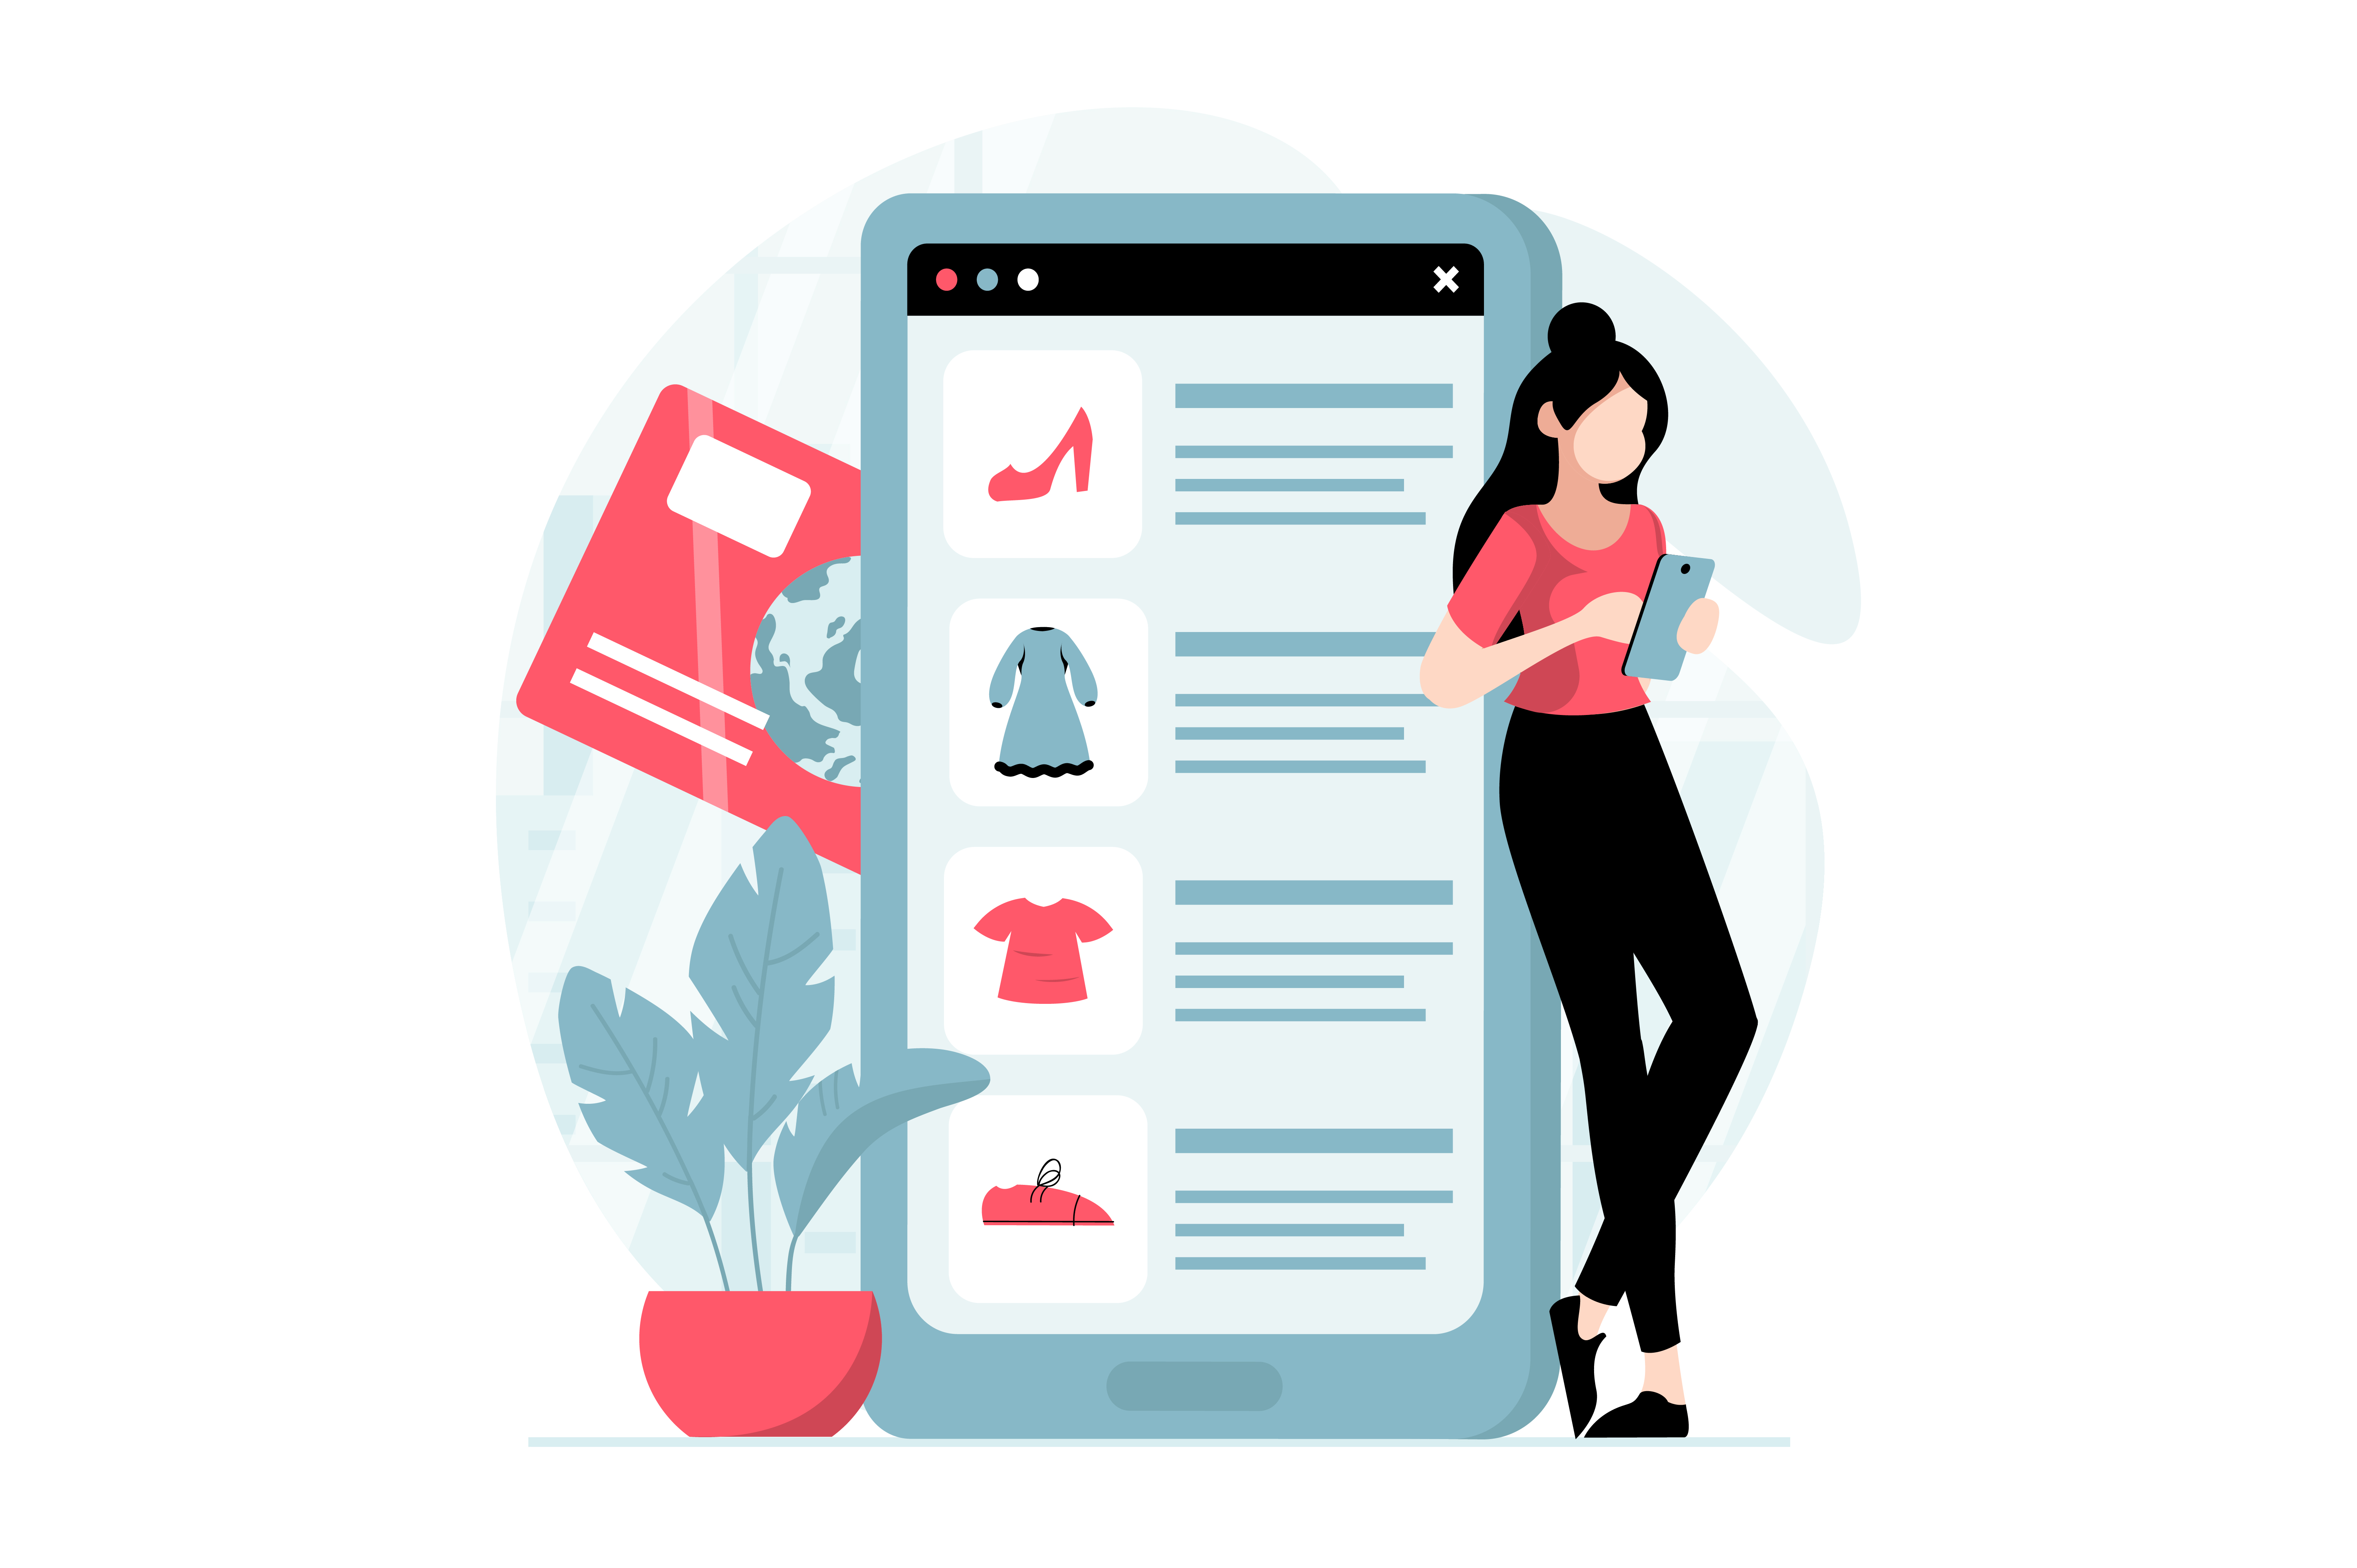 Mobile commerce concept with people scene in flat design. Woman choosing goods in assortment of internet shop and making online purchases in app. Vector illustration with character situation for web